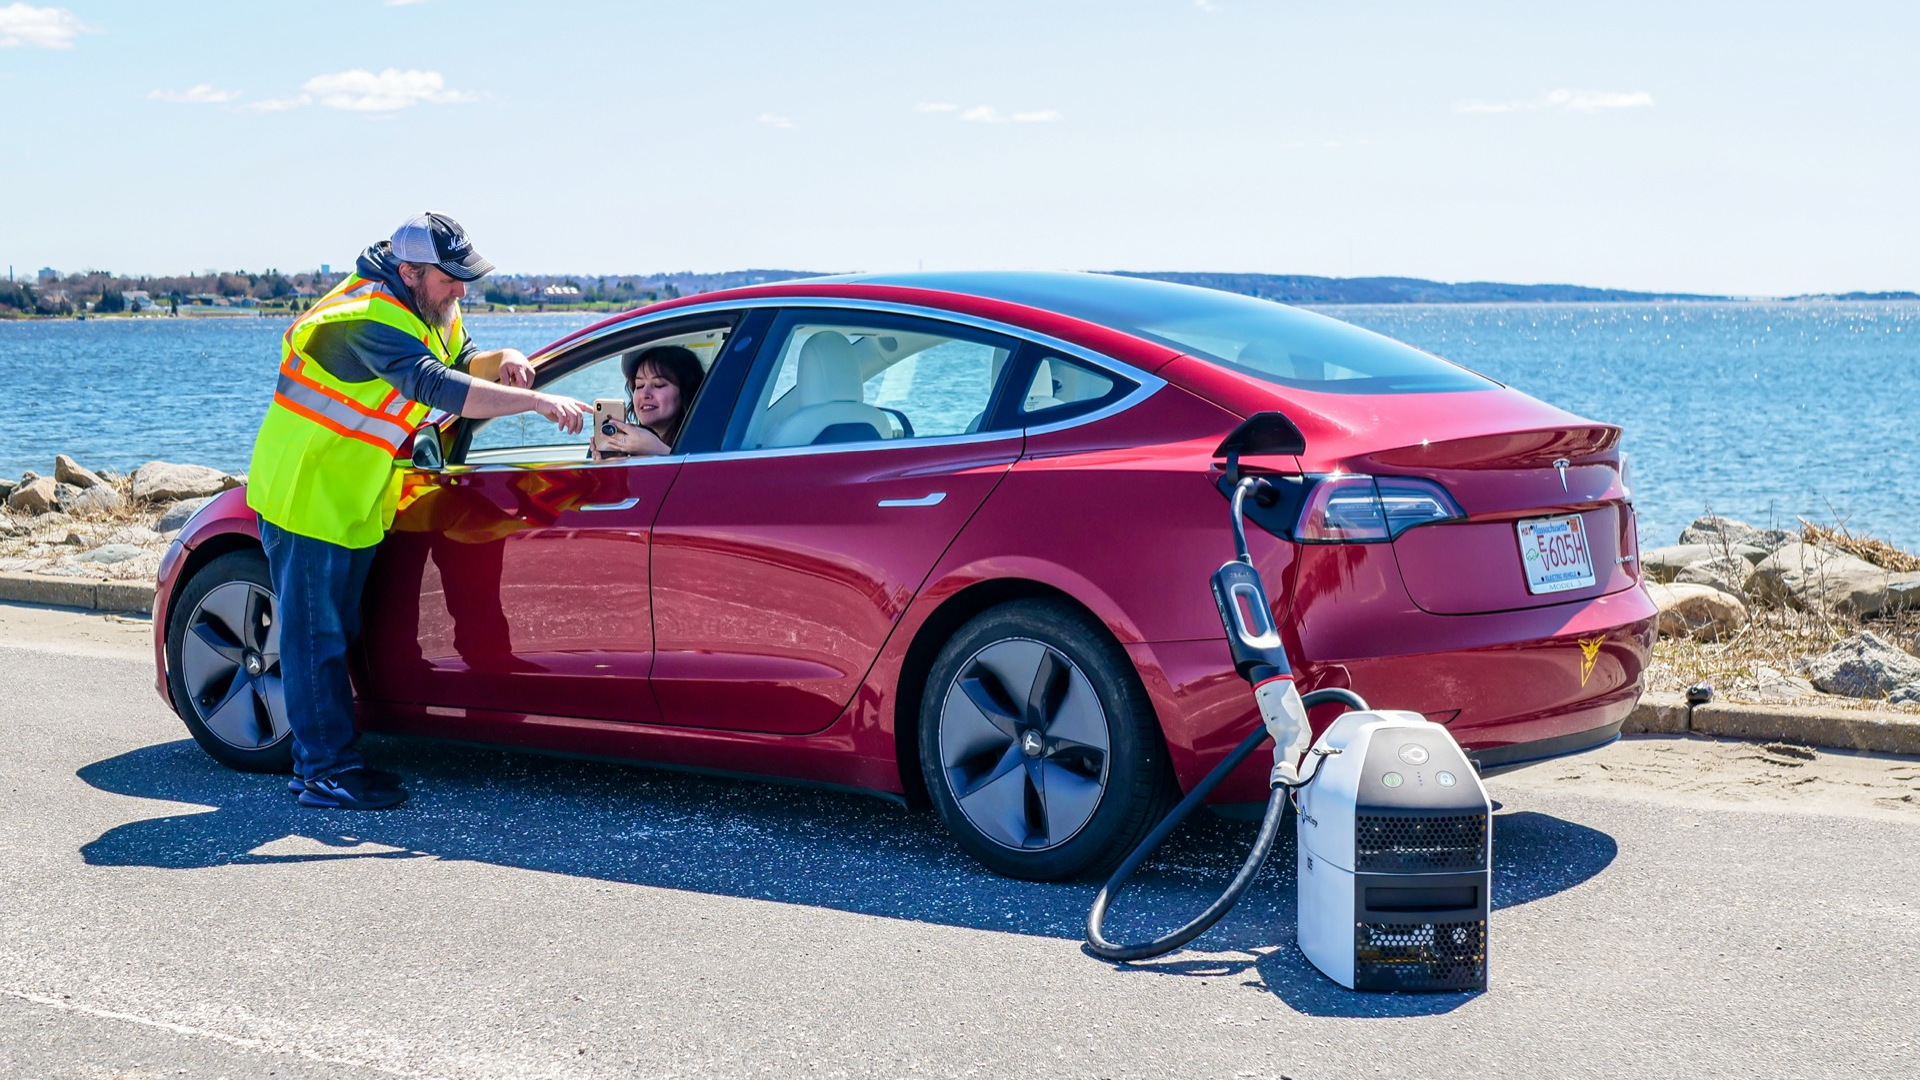 SparkCharge mobile charger with Tesla Model 3